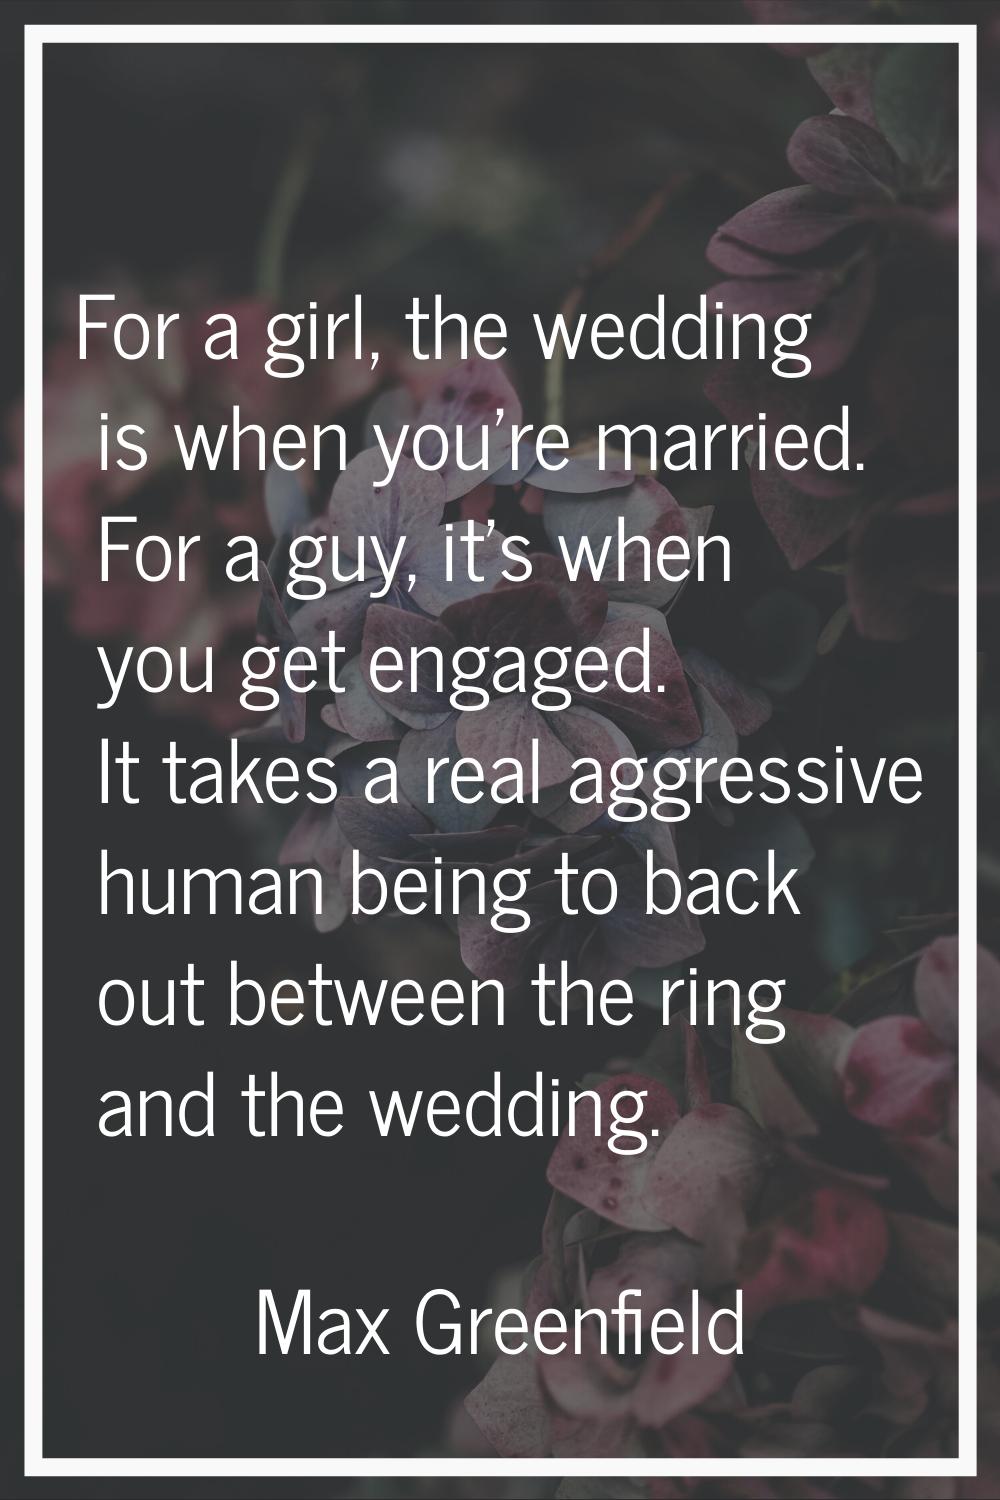 For a girl, the wedding is when you're married. For a guy, it's when you get engaged. It takes a re